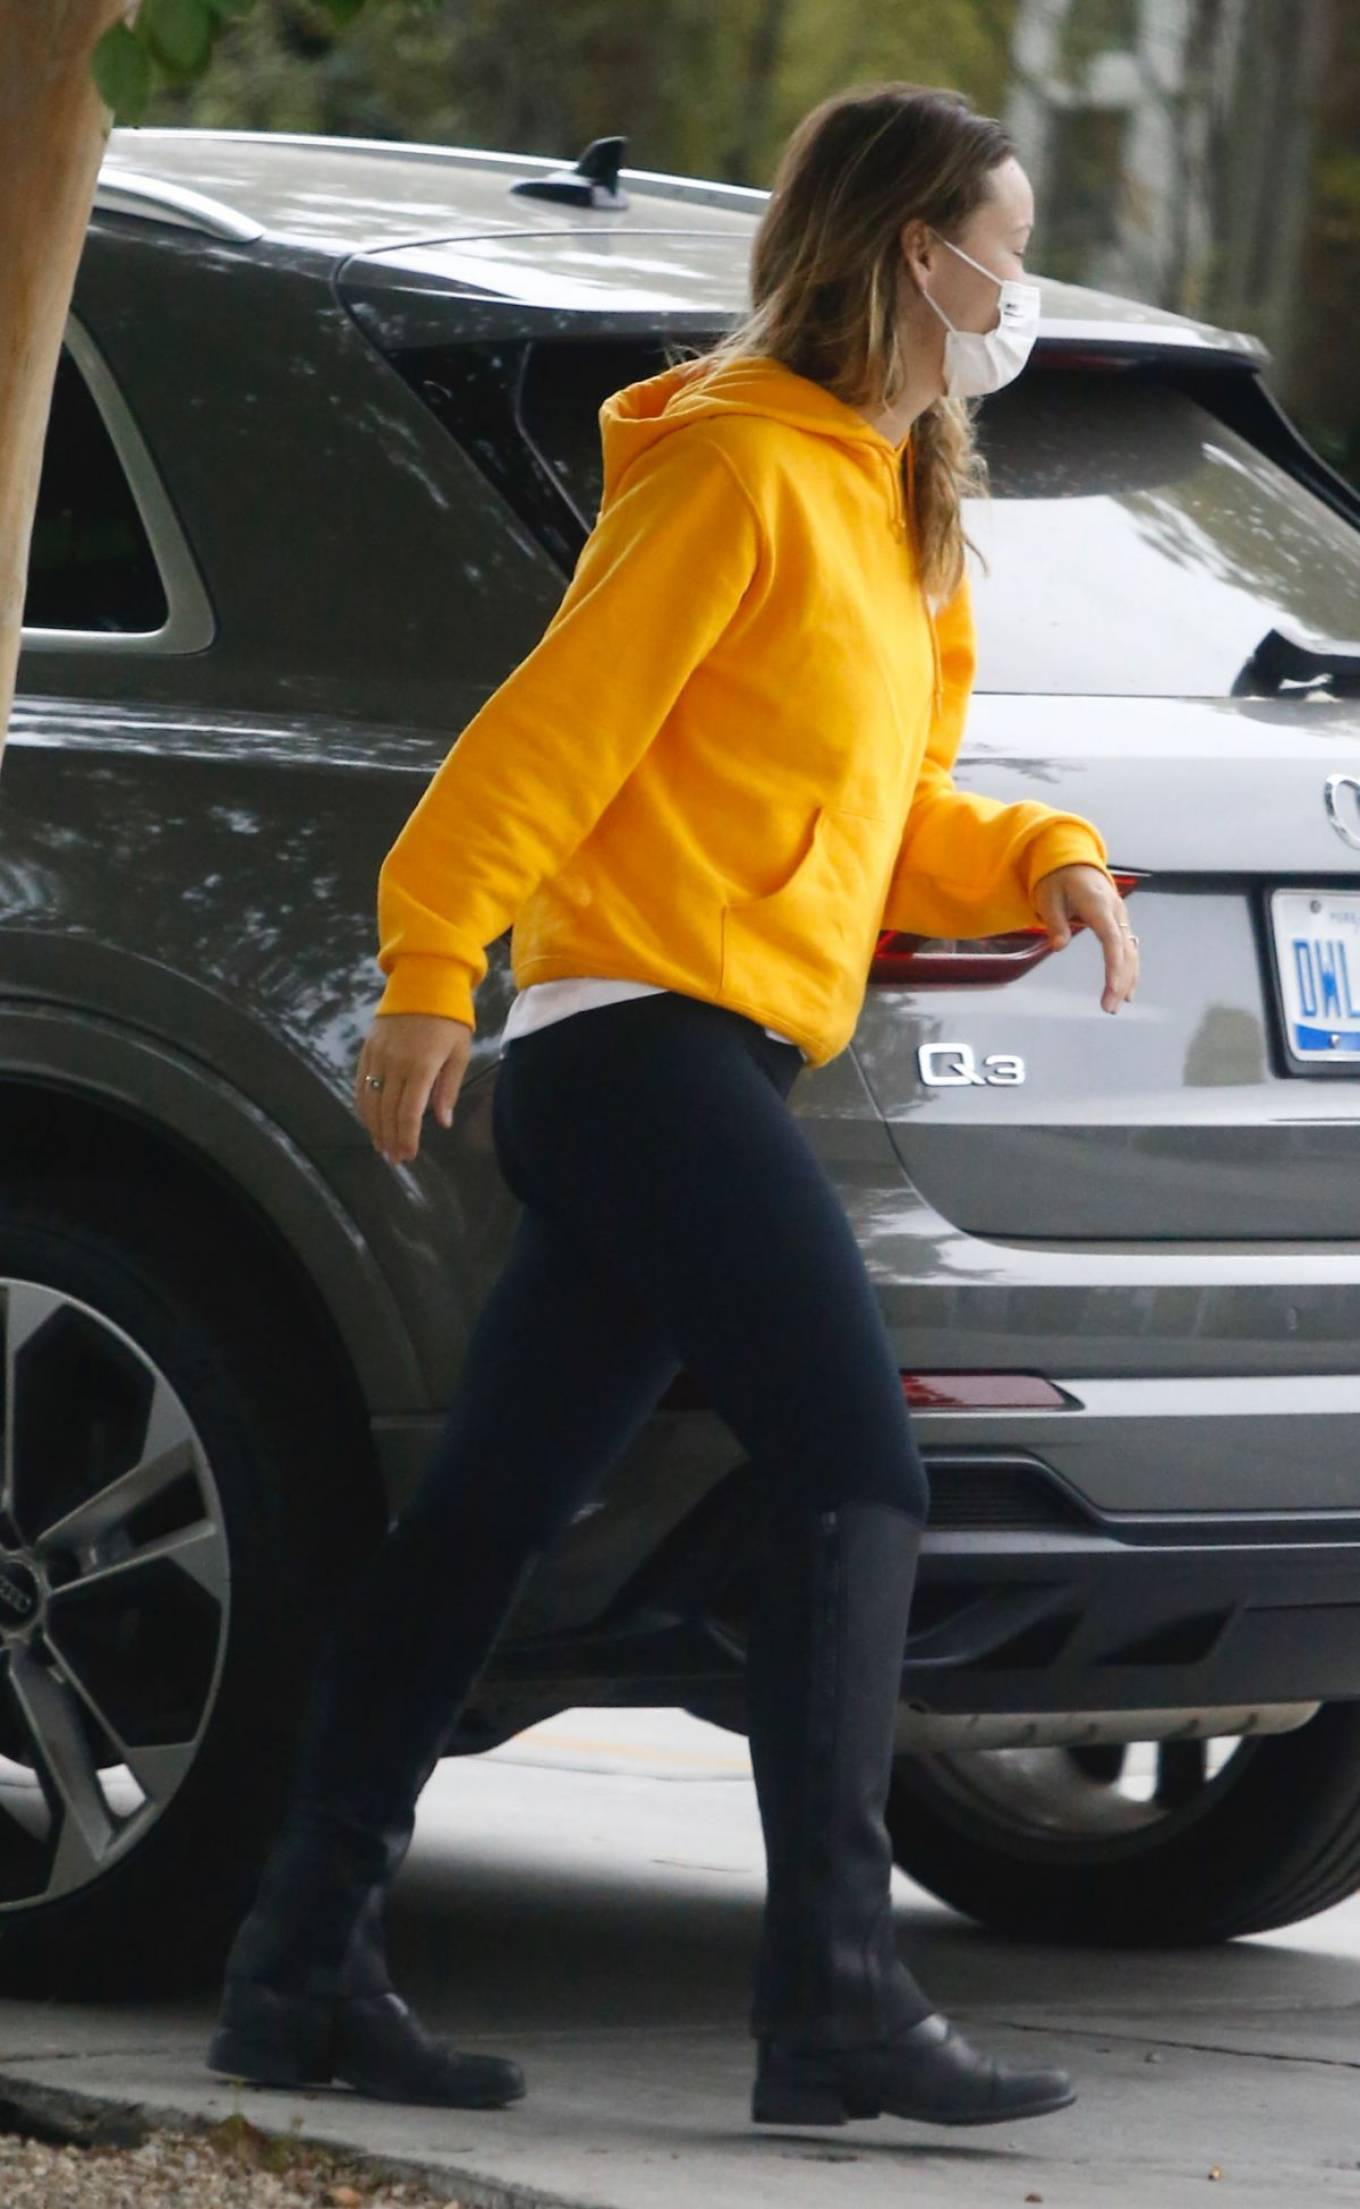 Olivia Wilde 2020 : Olivia Wilde – In yellow out and about in LA-04